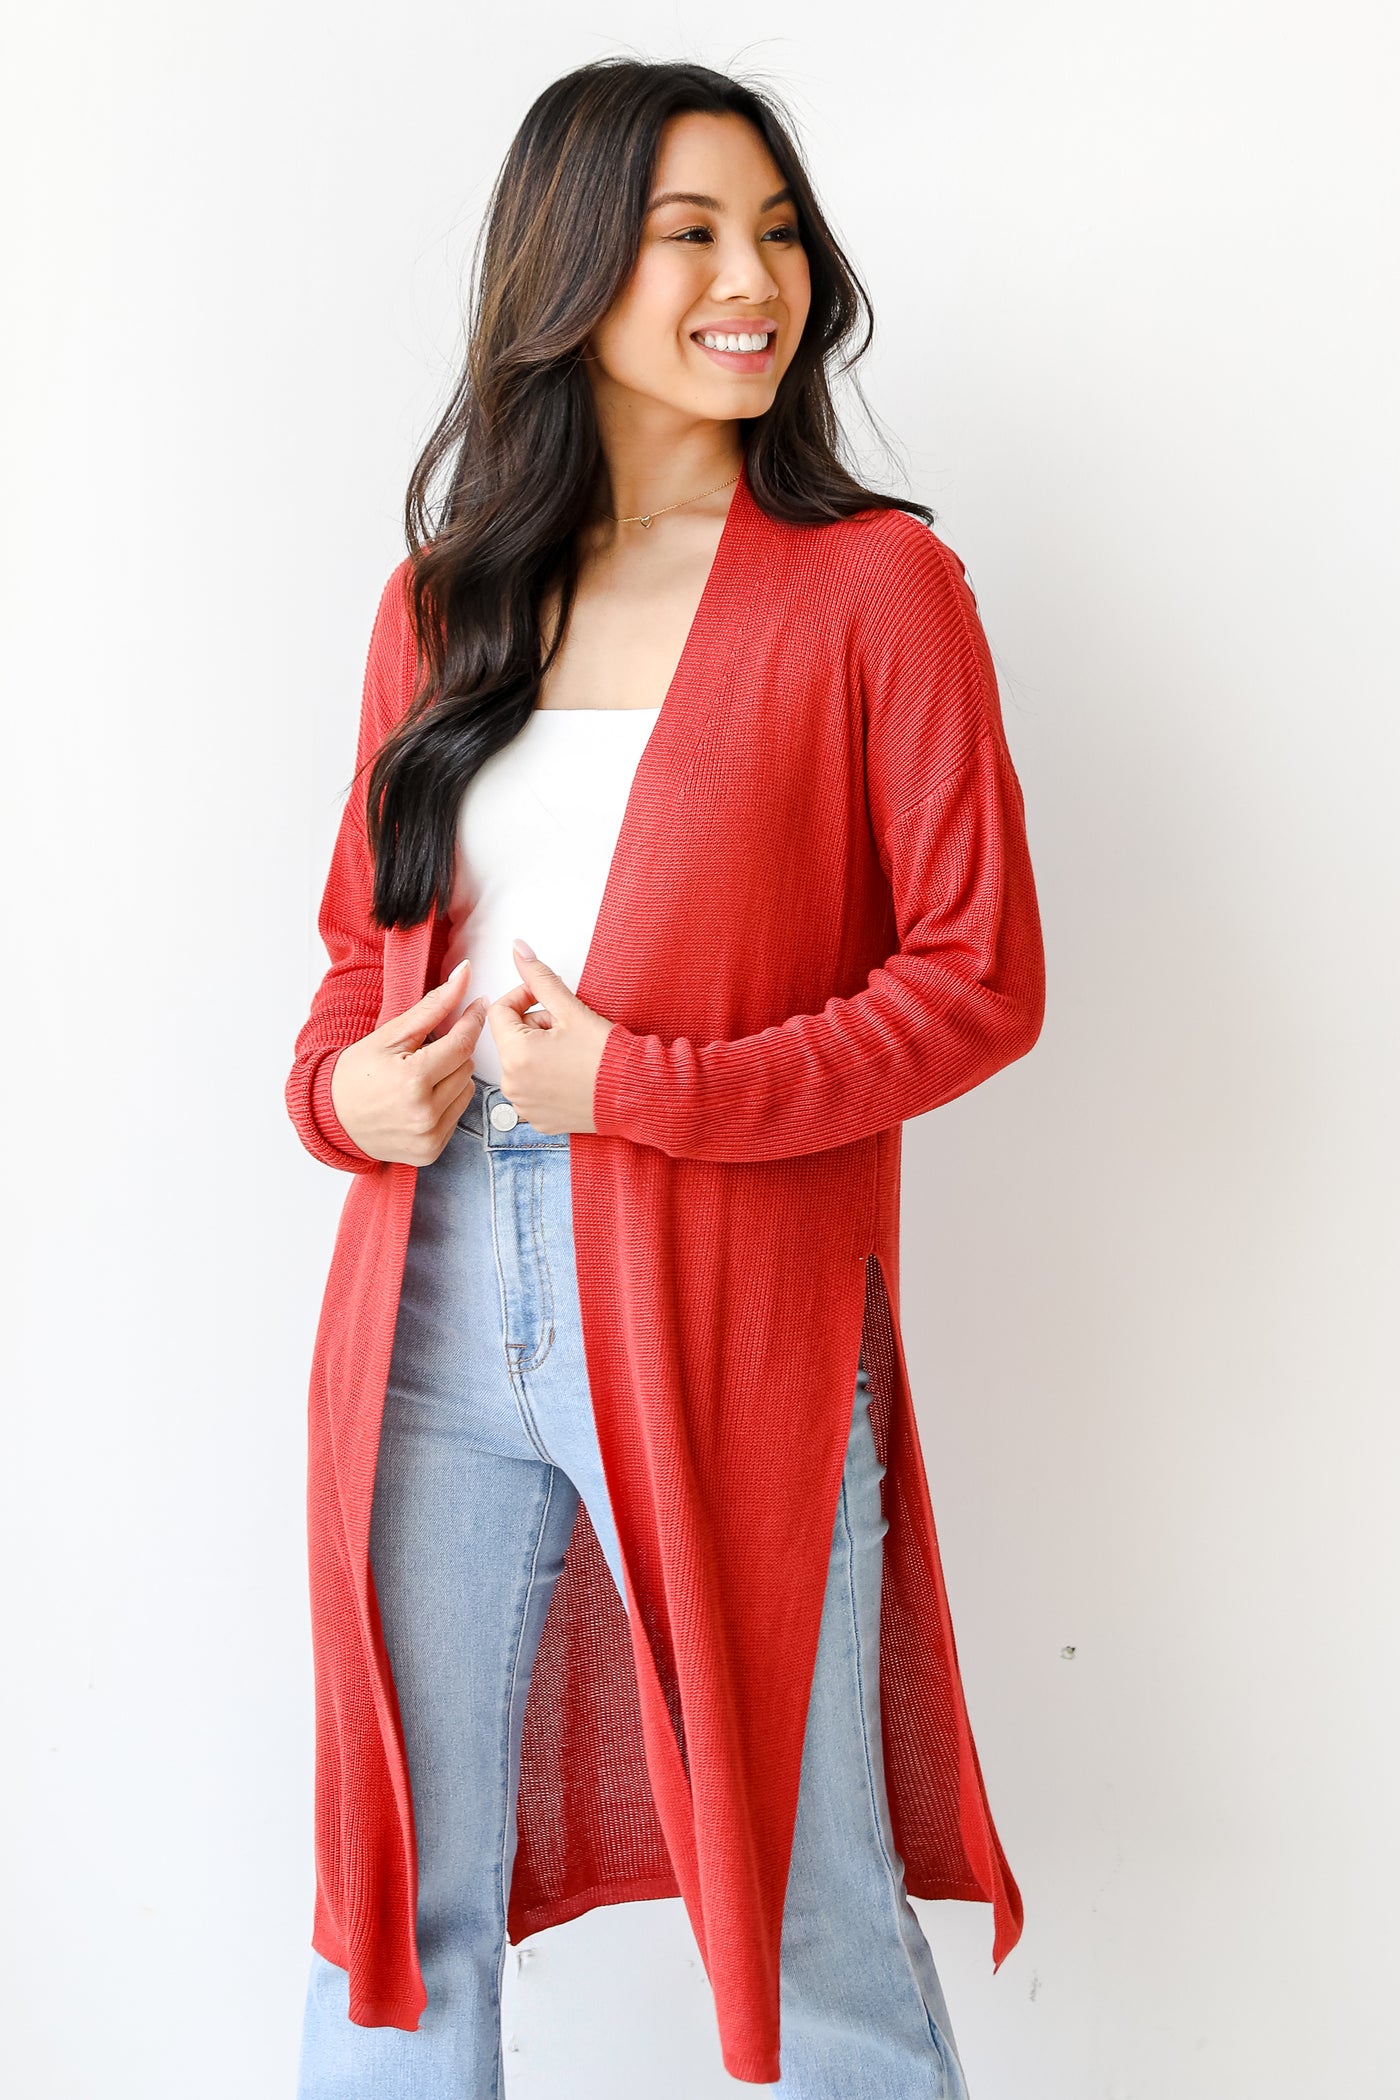 Cardigan in coral on model